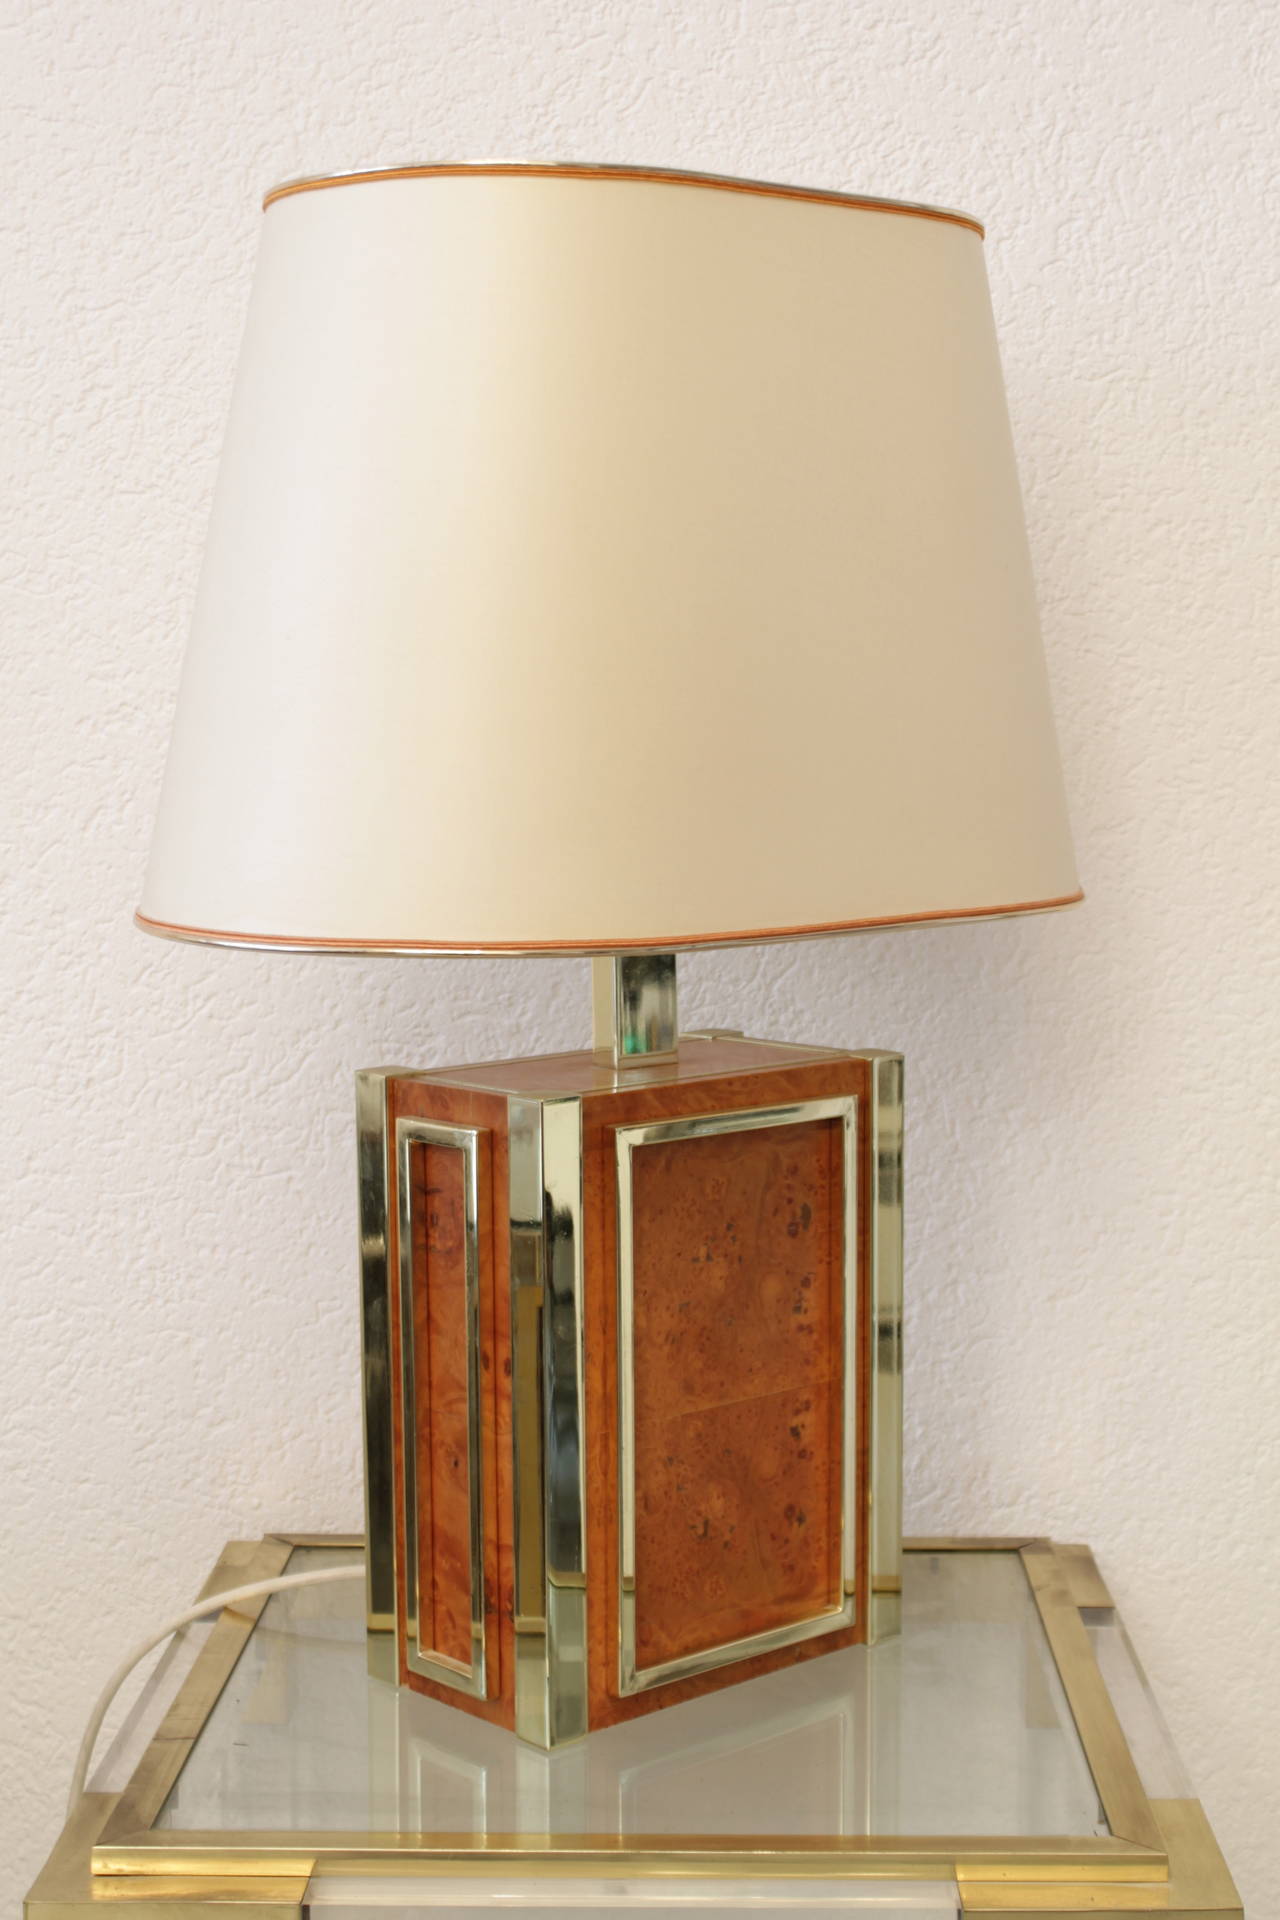 Burl wood and brass table lamp by Renato Zevi.
Perfect condition.